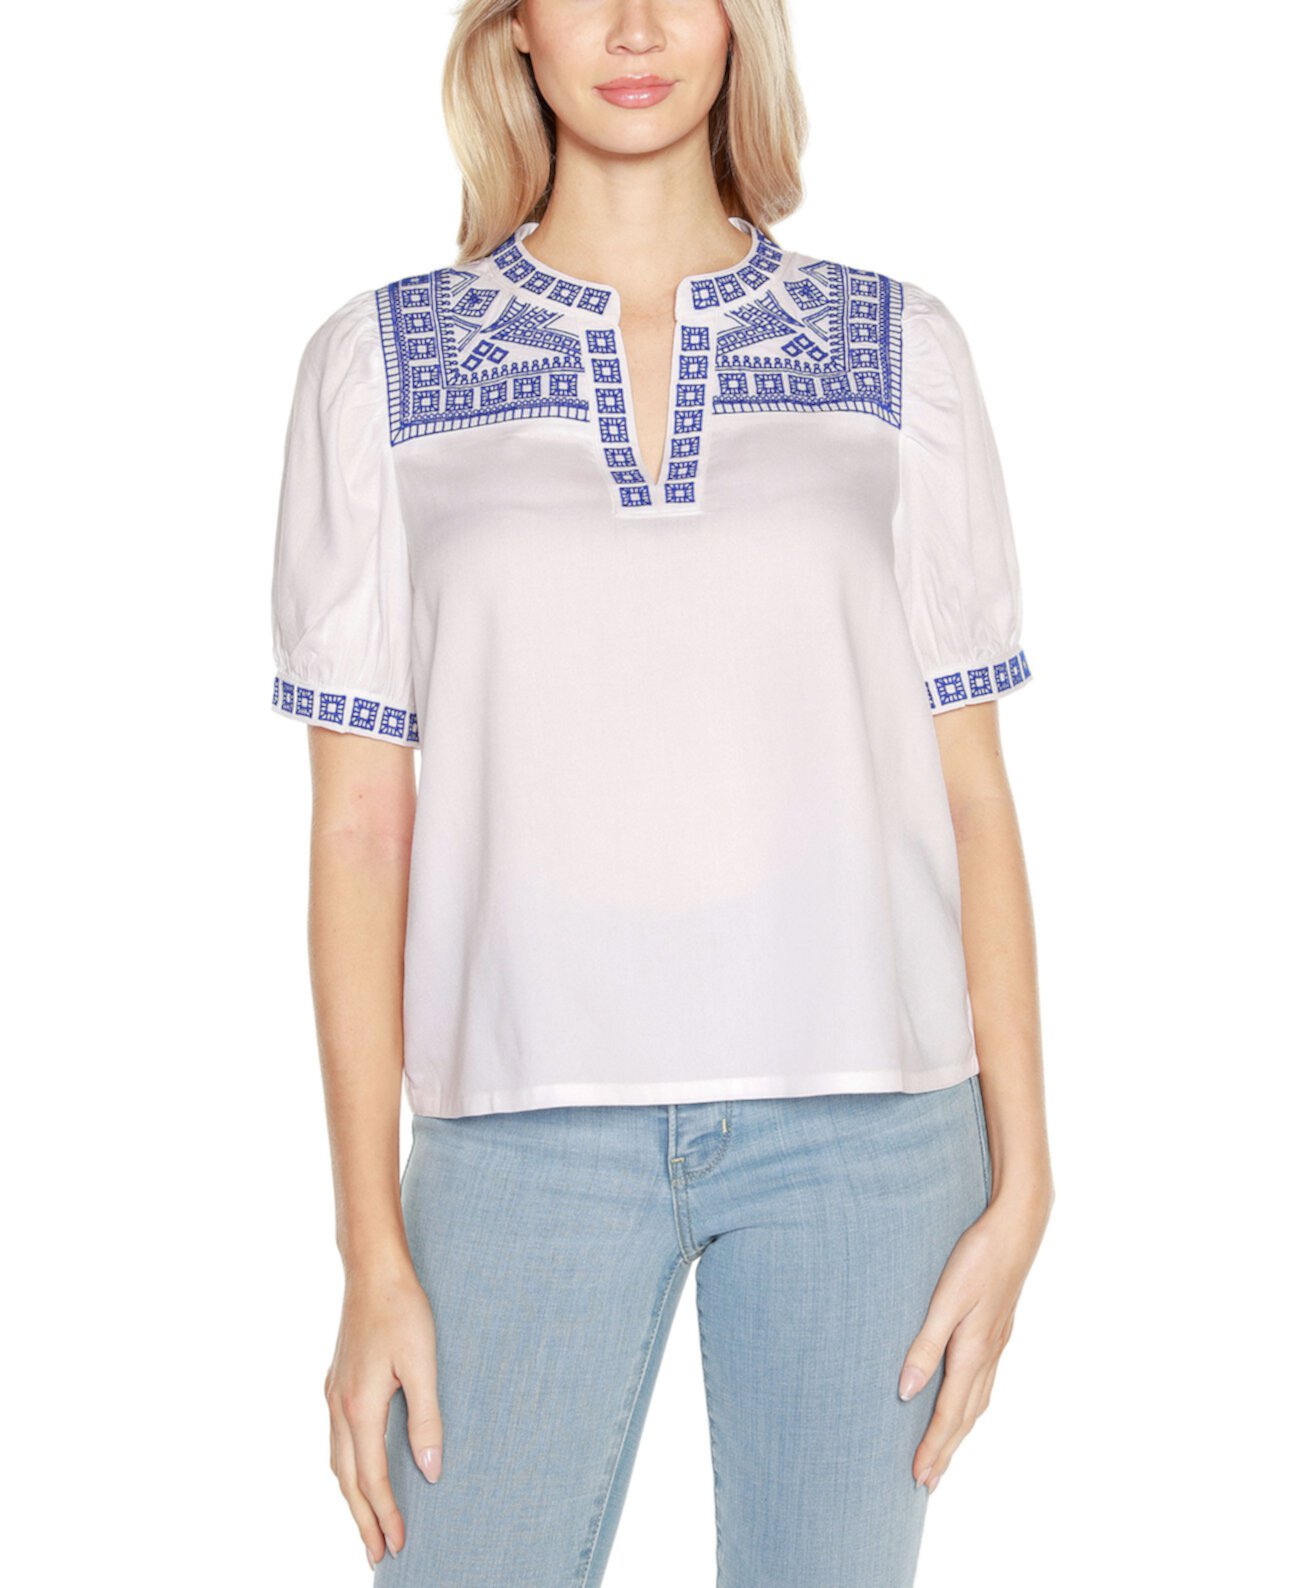 Women's Embroidered Boho Short Sleeve Top Belldini